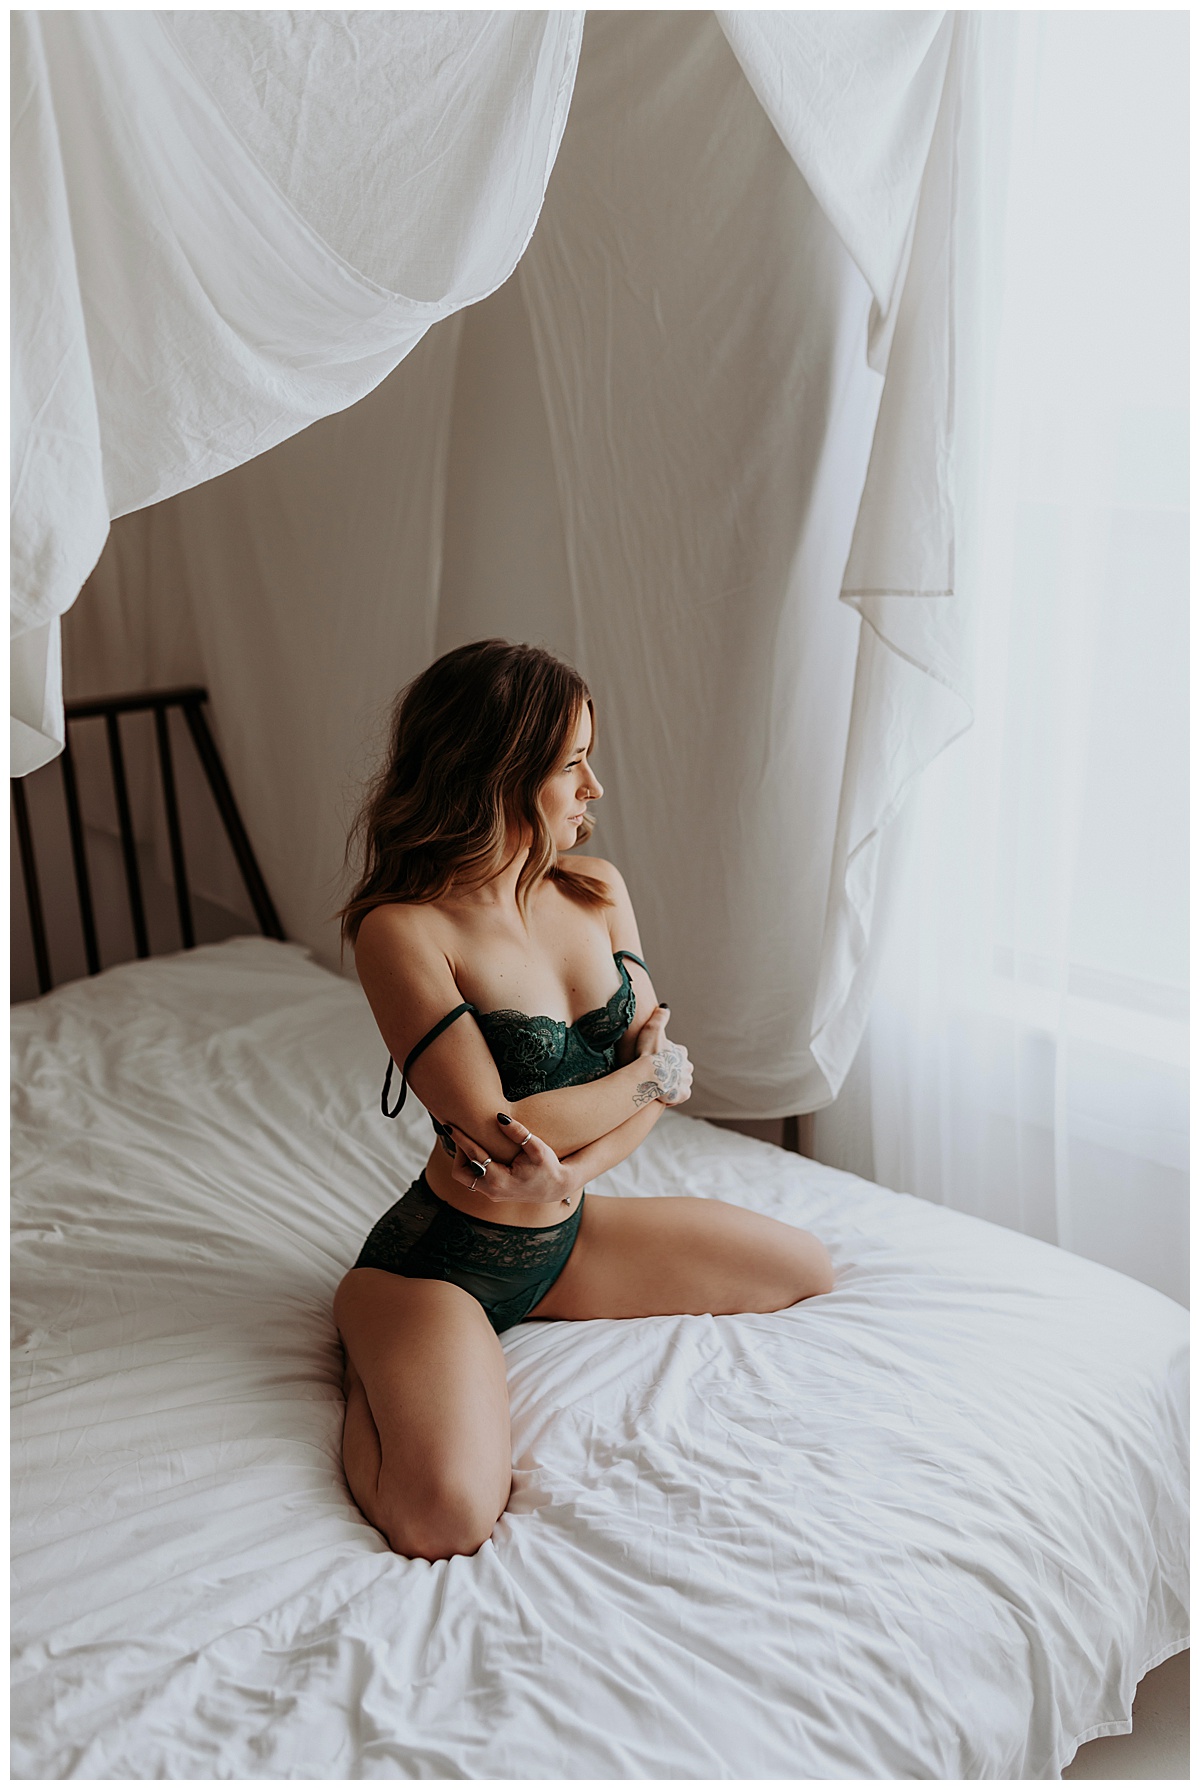 Adult hugs and holds body in lingerie sitting on bed for Minneapolis Boudoir Photographer